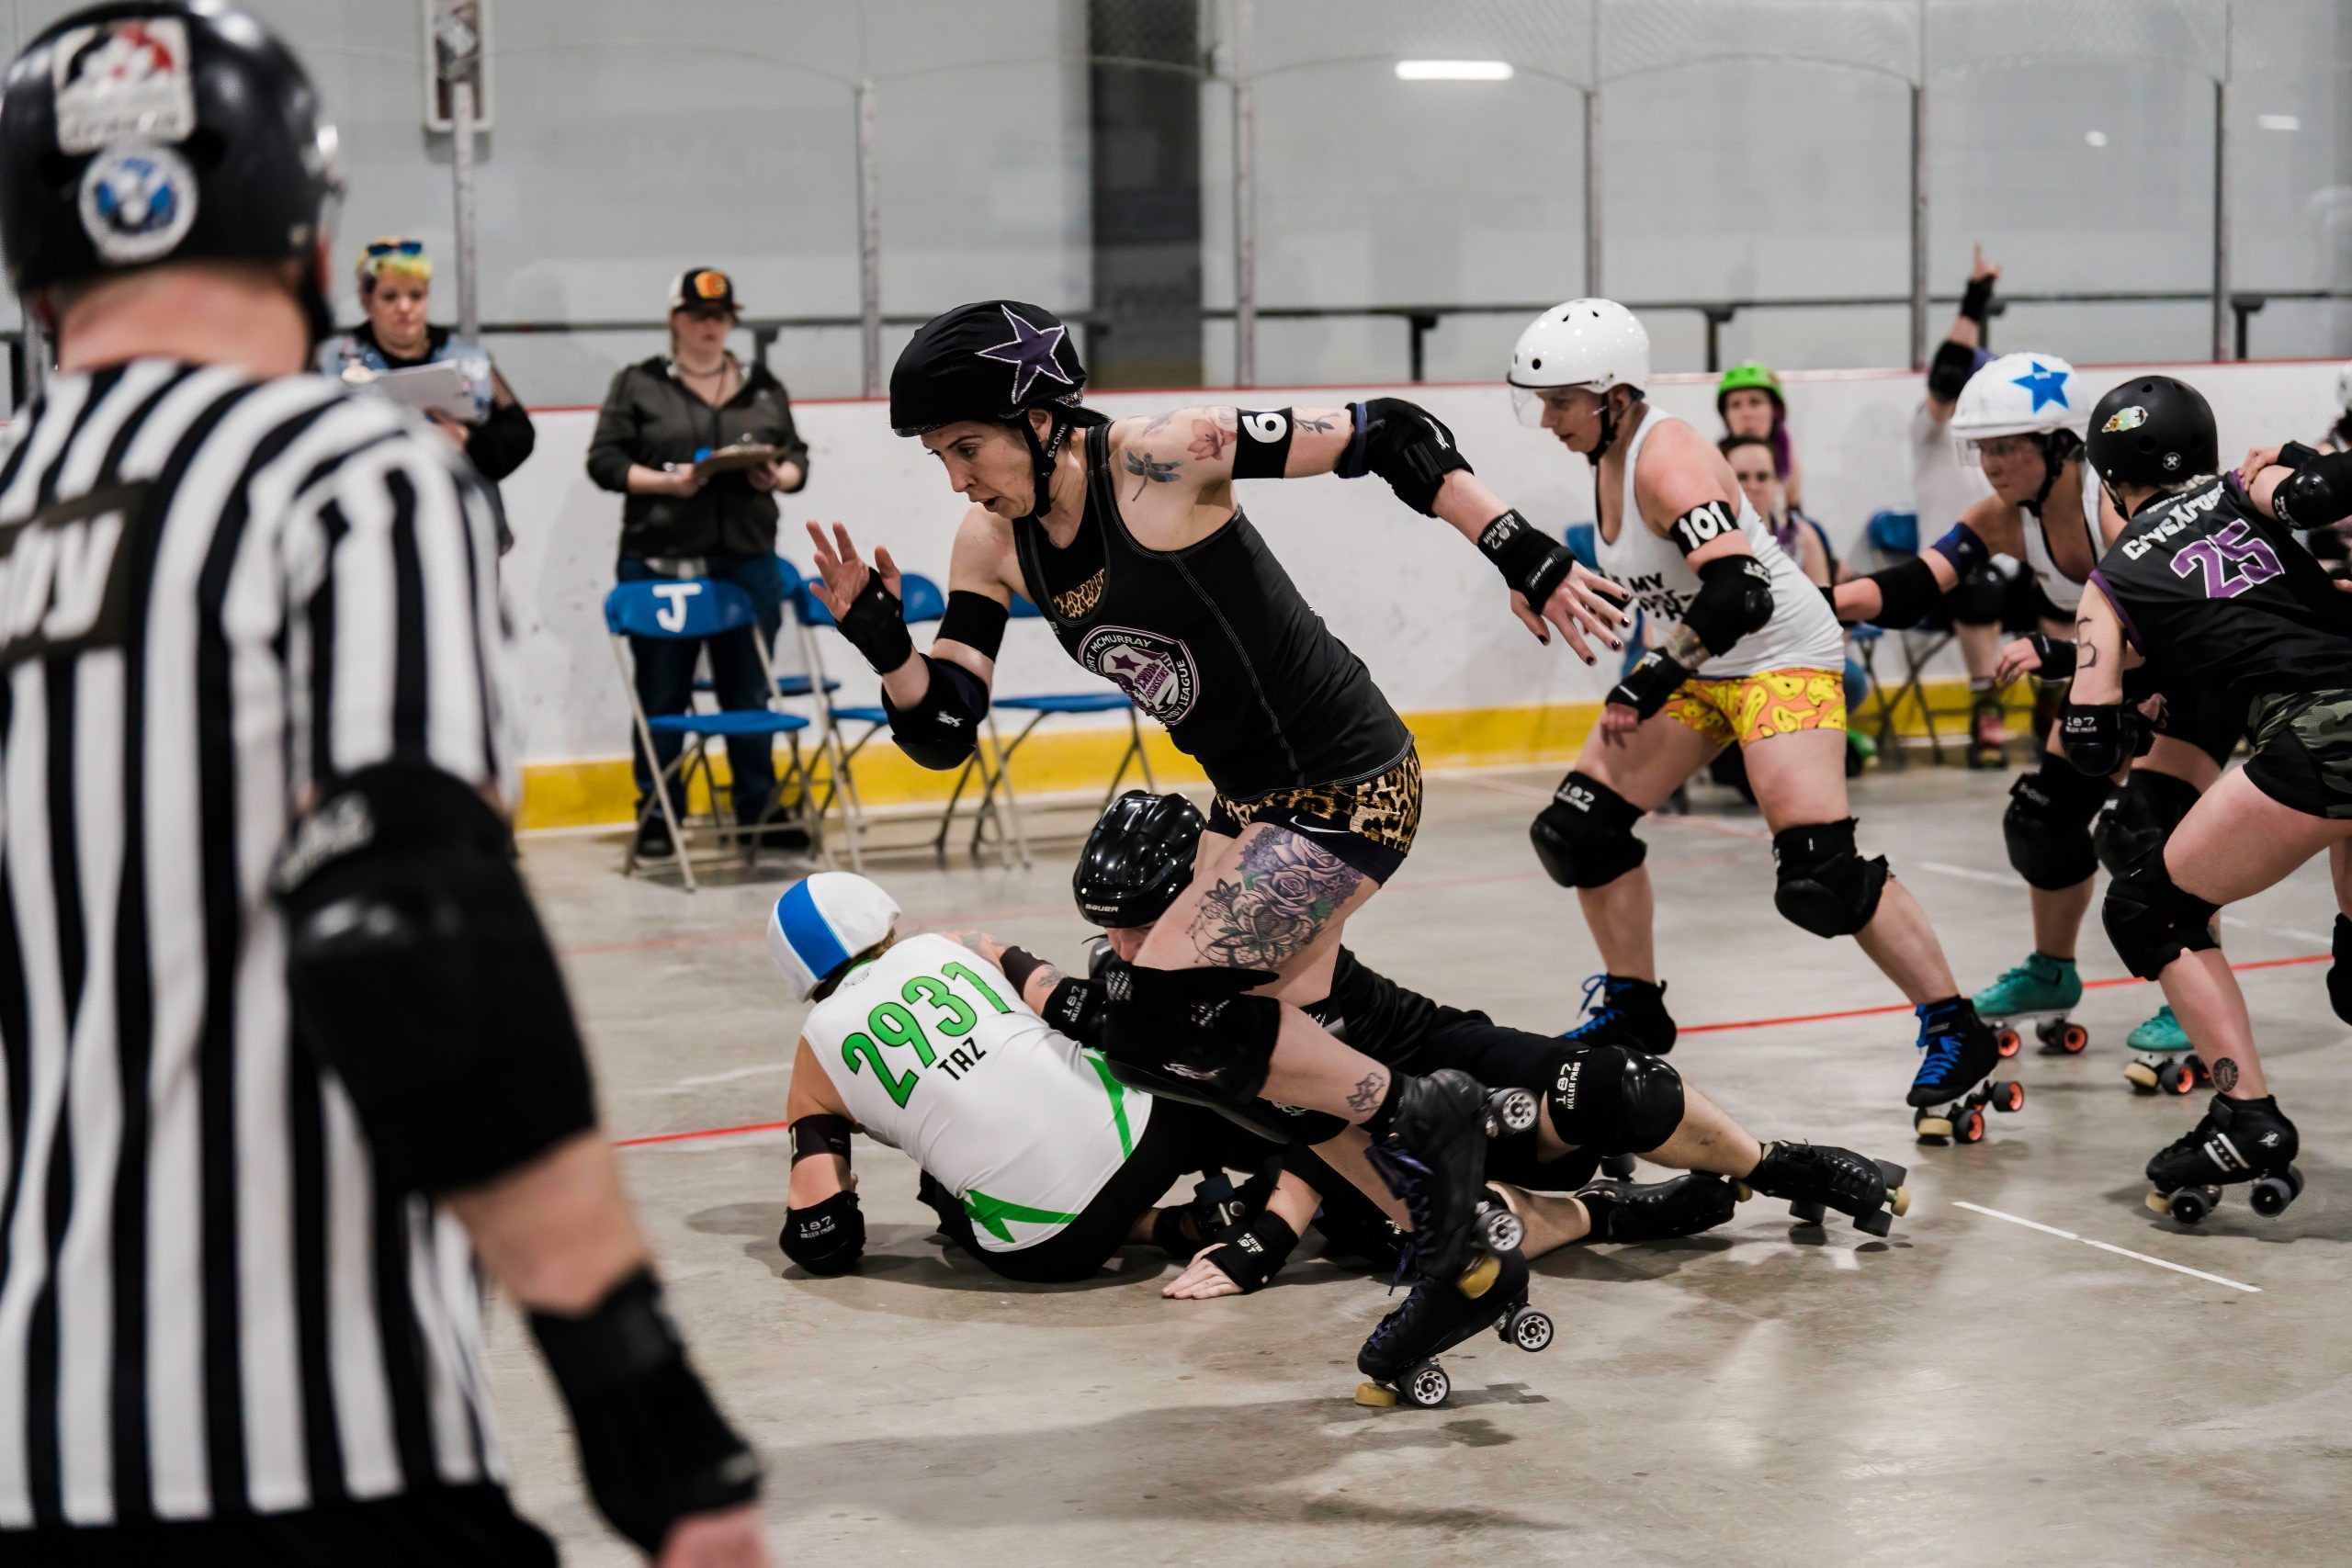 Team Alberta Roller Derby includes four athletes from Fort